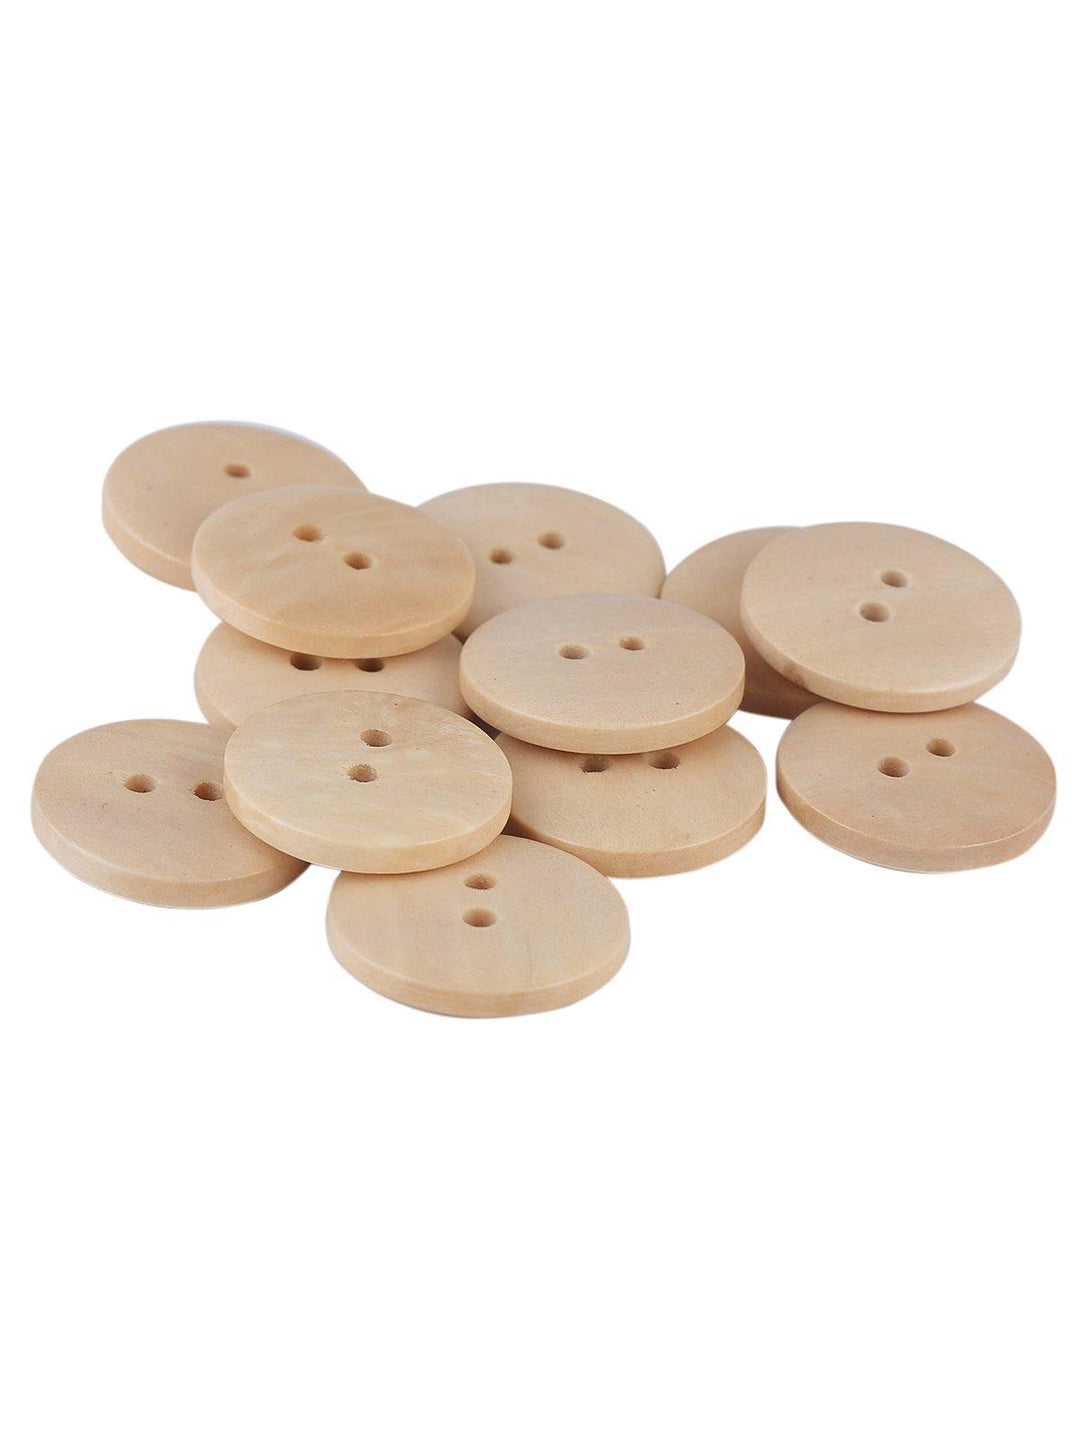 Round Shape 2-Hole Fashionable Wooden Cream Color Dome Button